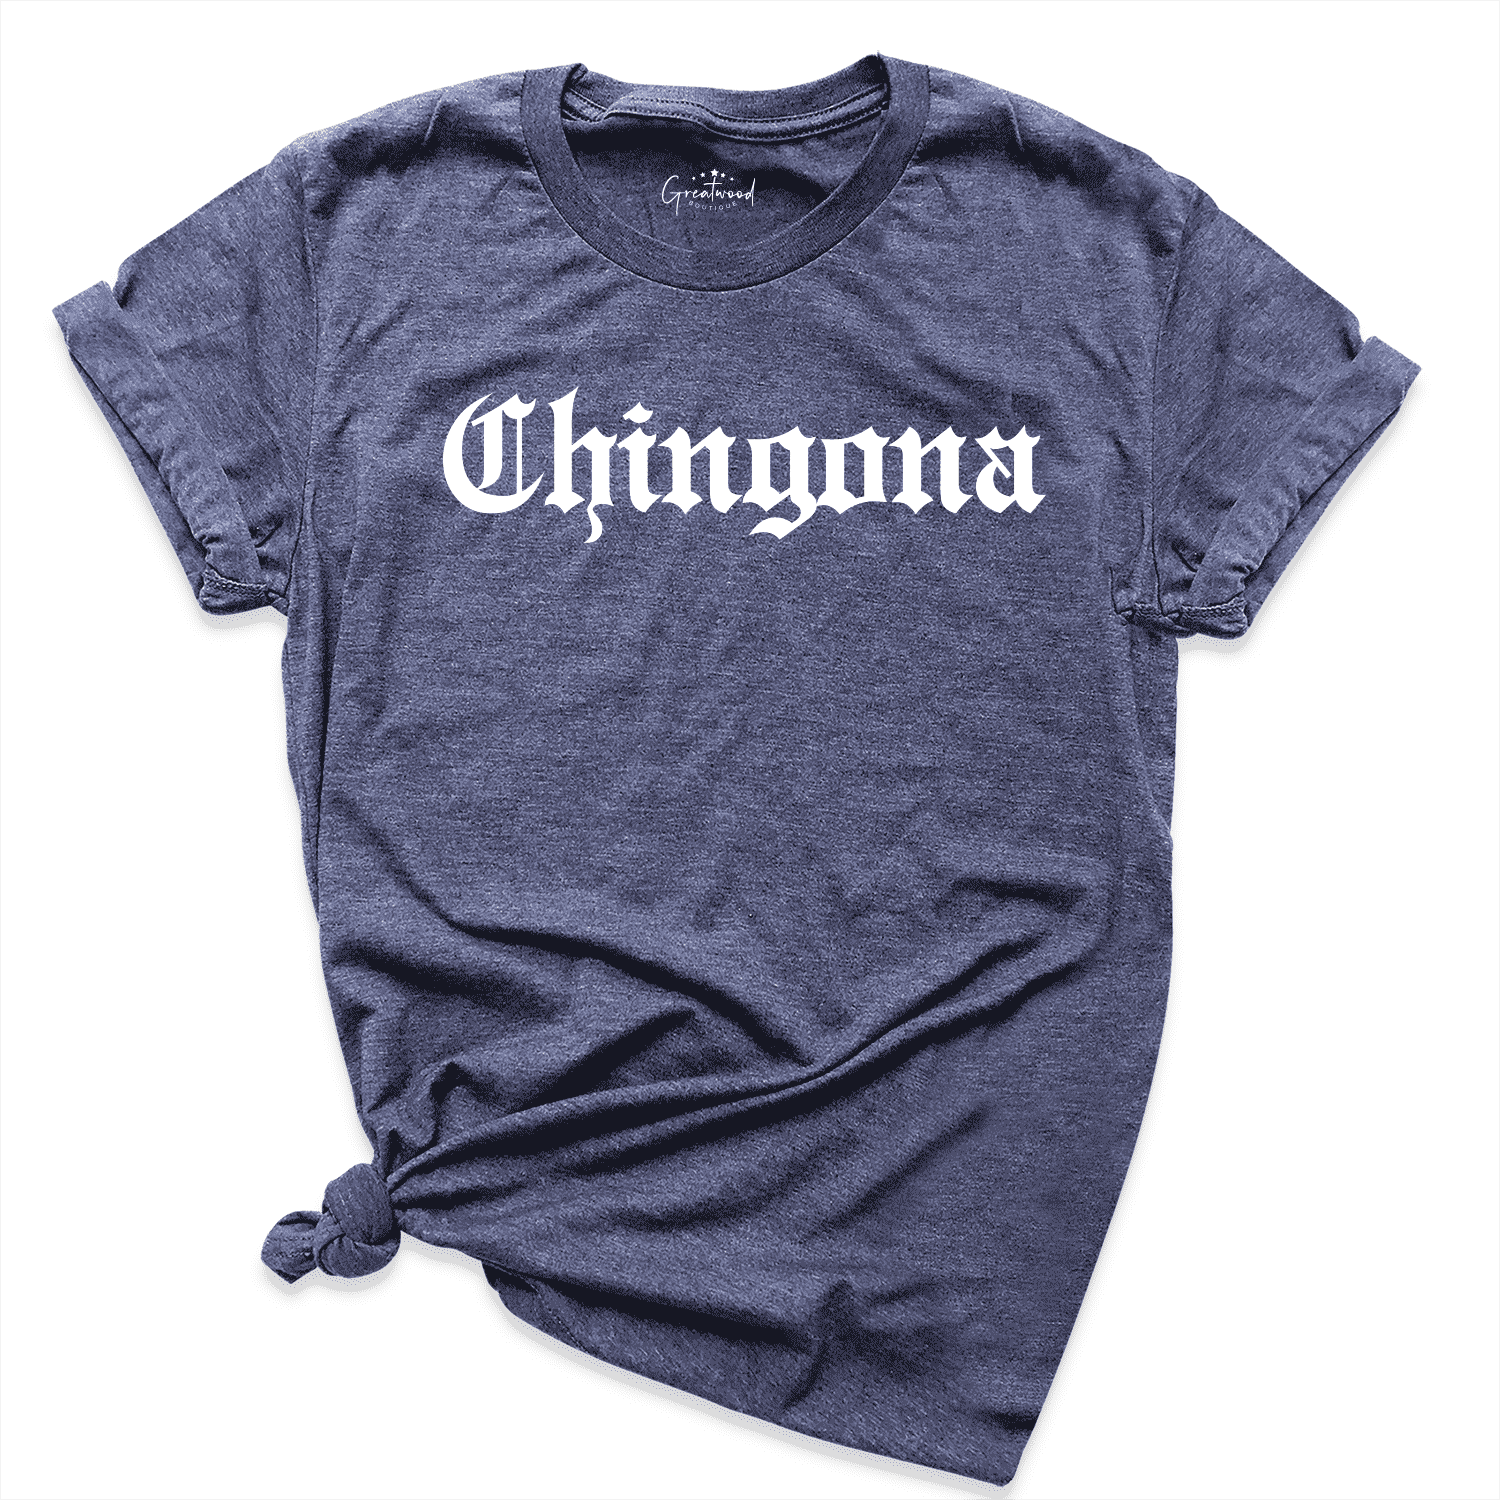 Chingona Shirt Navy - Greatwood Boutique